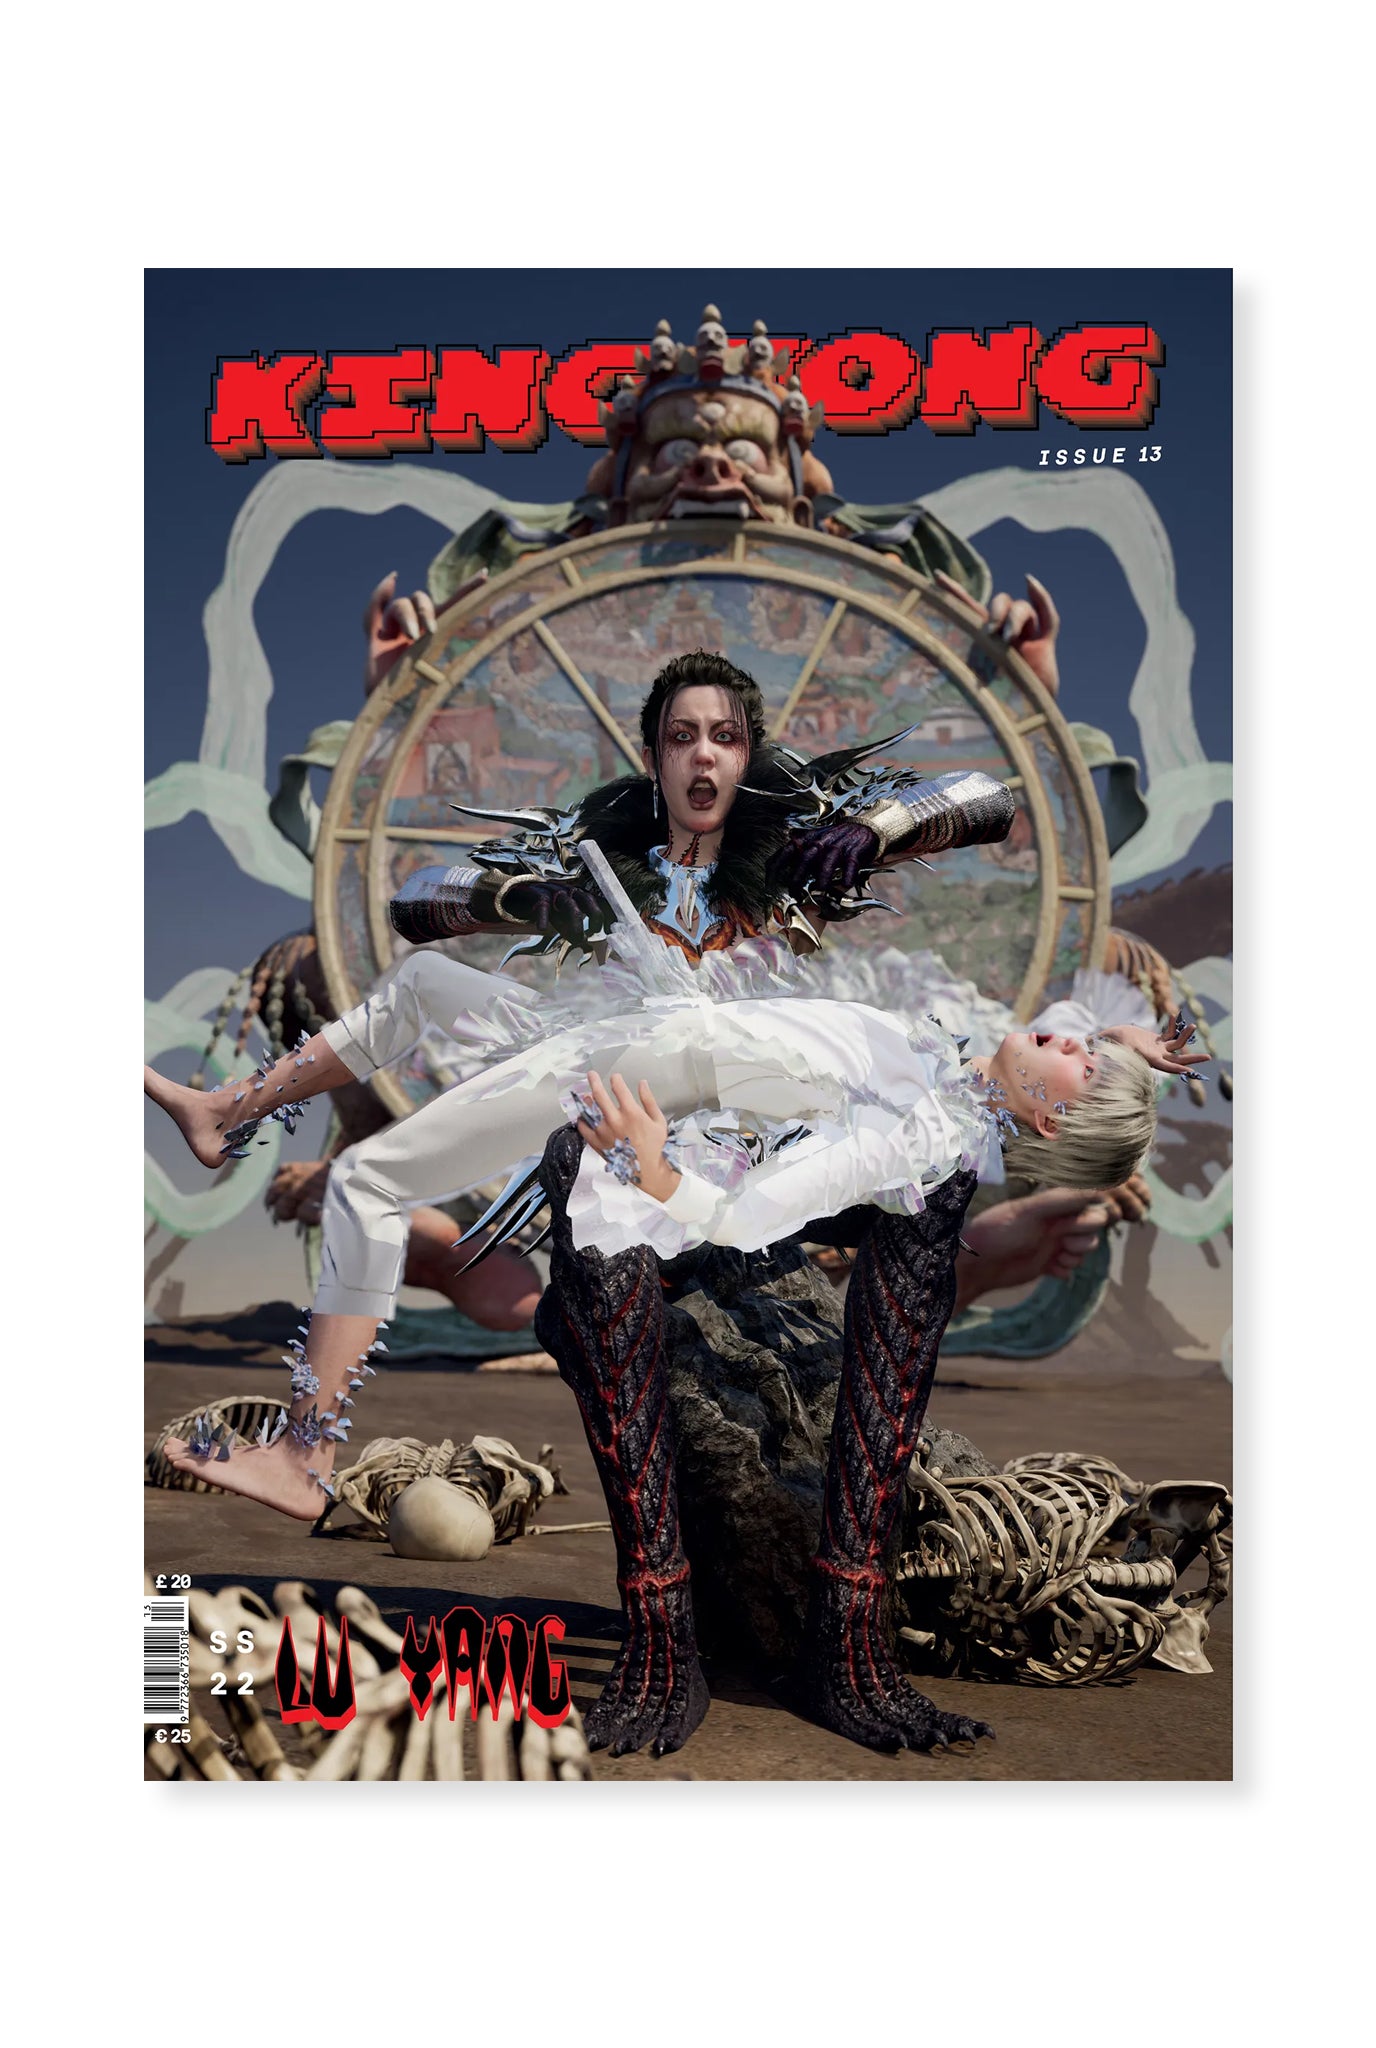 King Kong, Issue 13 - The Gaming Issue